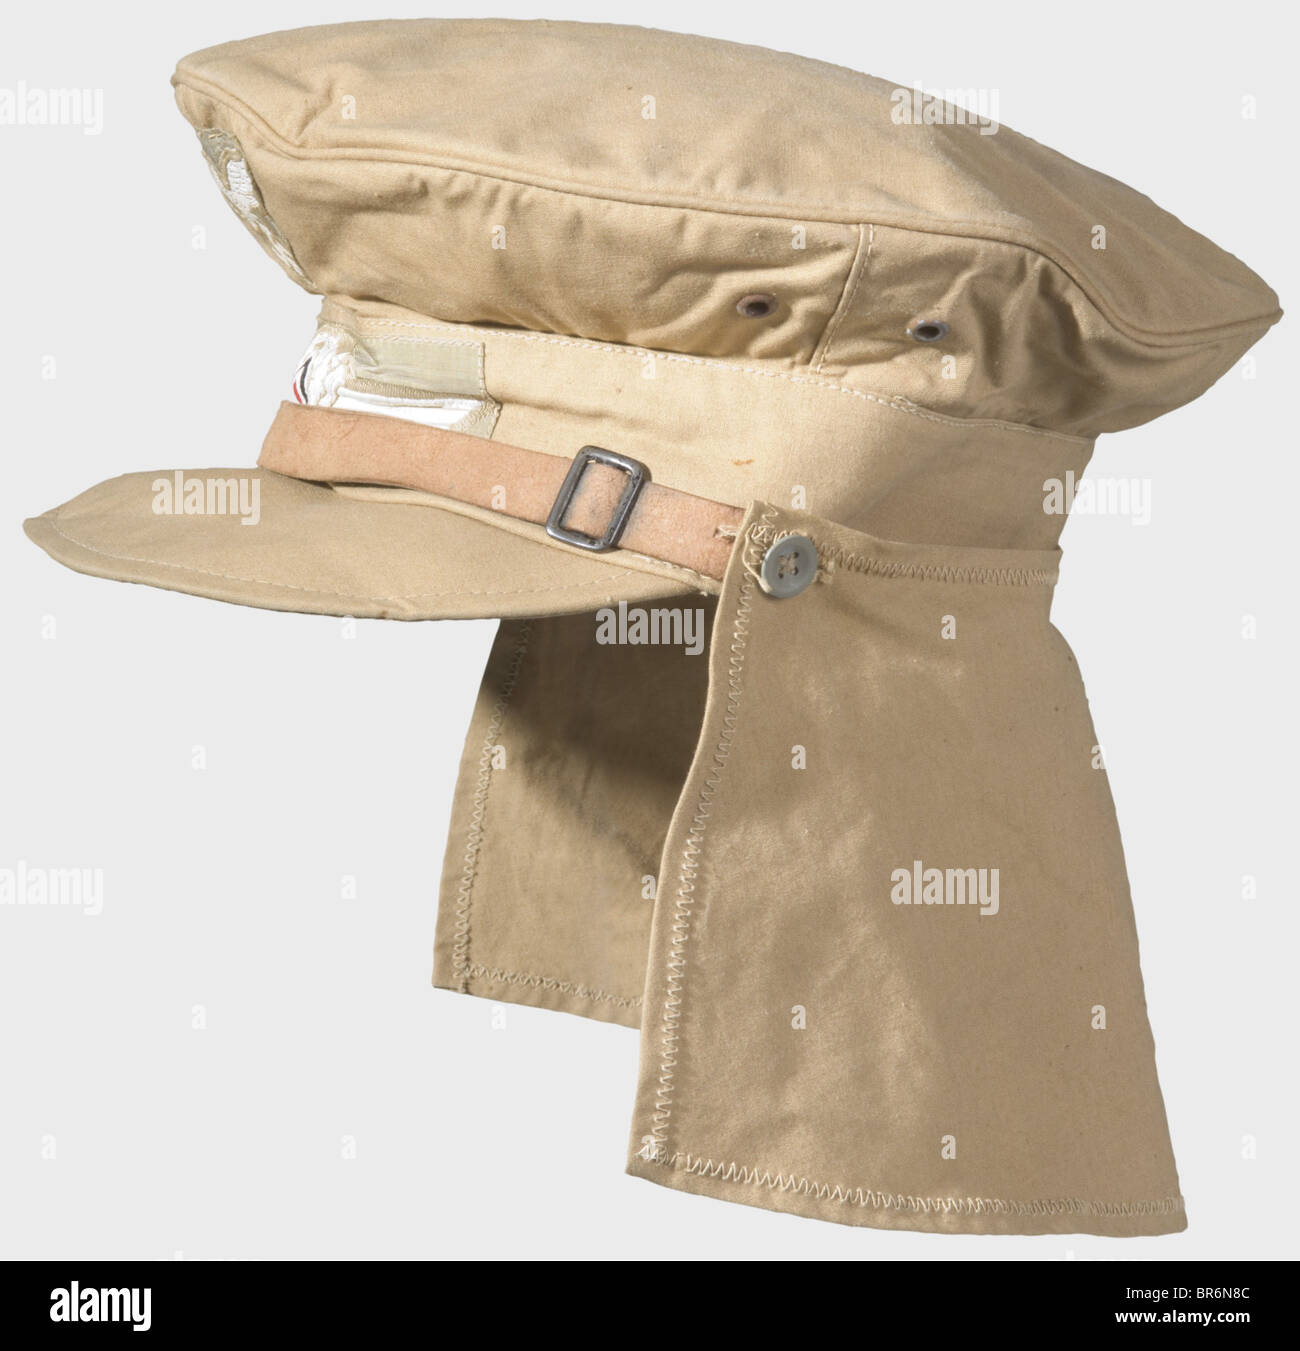 A tropical visor cap, of sand coloured cotton with woven emblems, four iron ventilation rivets, neck shade and leather chinstrap on zinc buttons. Red cotton lining with black RB number stamp and size stamp '57'. historic, historical, 1930s, 20th century, Air Force, branch of service, branches of service, armed service, armed services, military, militaria, air forces, object, objects, stills, clipping, clippings, cut out, cut-out, cut-outs, uniform, uniforms, clothes, piece of clothing, headpiece, headpieces, cap, caps, hat, hats, bonnet, bonnets, accessory, acc, Stock Photo